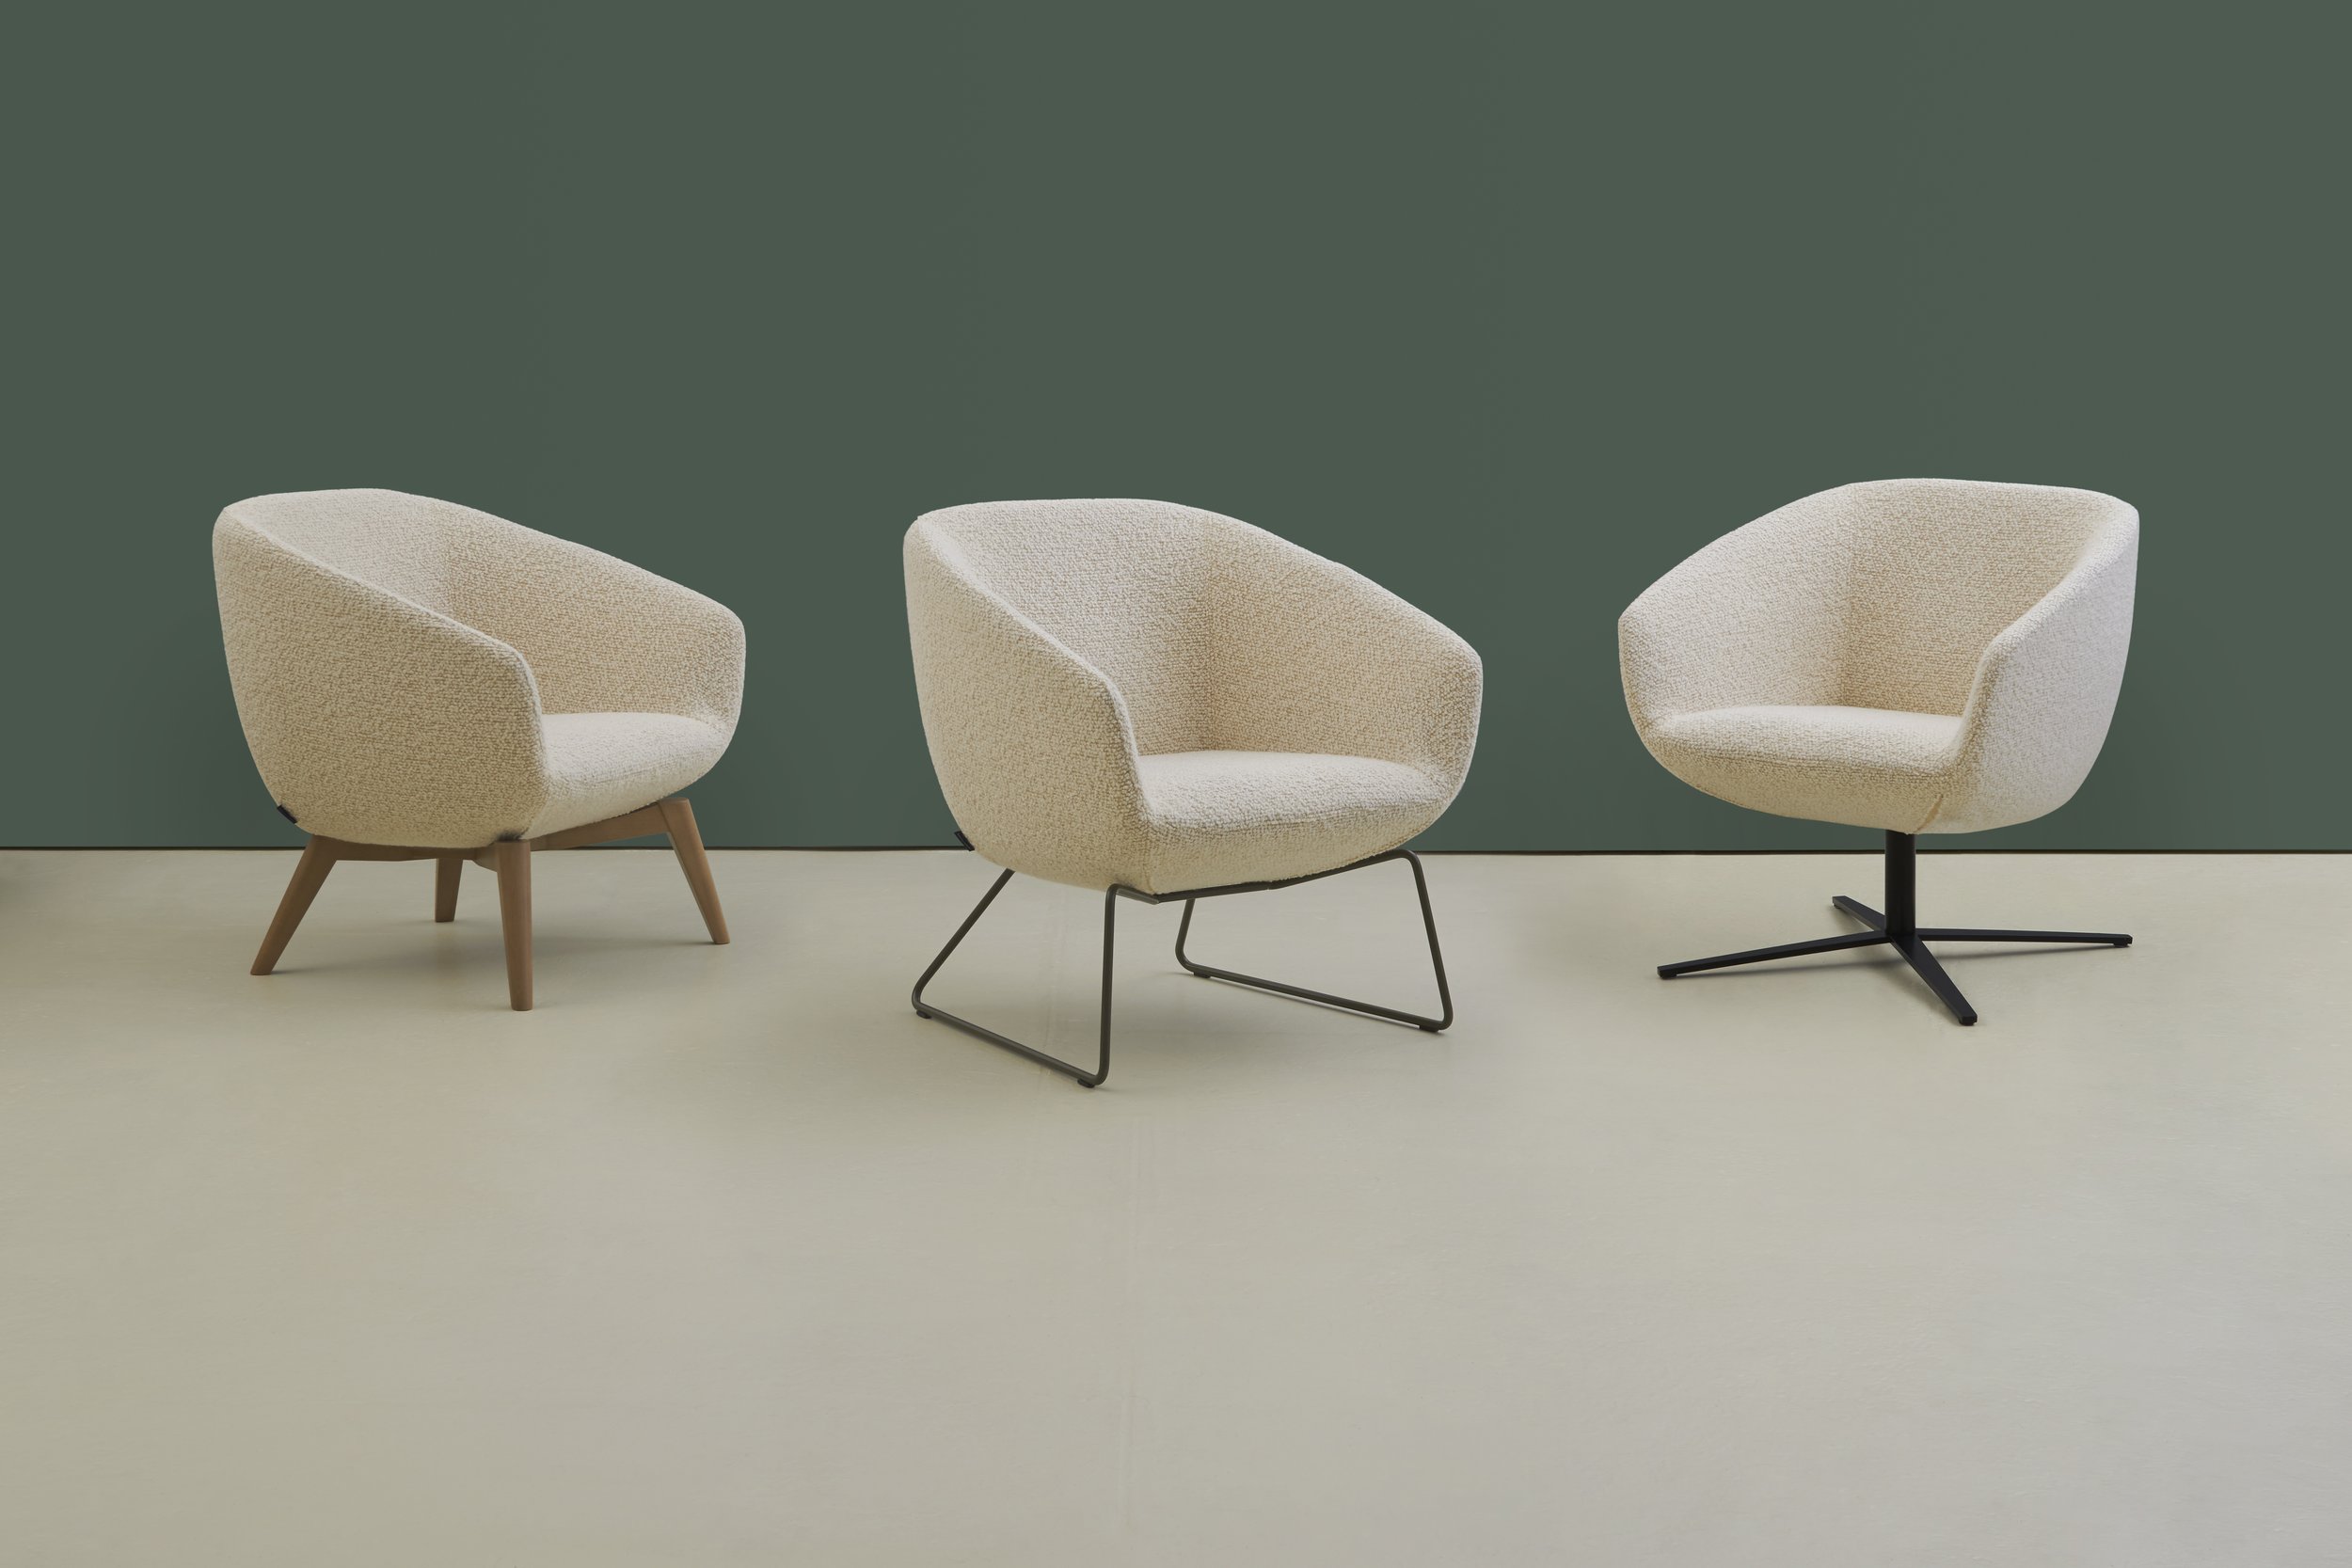 hm22f, g and h (Bute Storr 1501 Eggshell) lounge chair collection (1).jpg